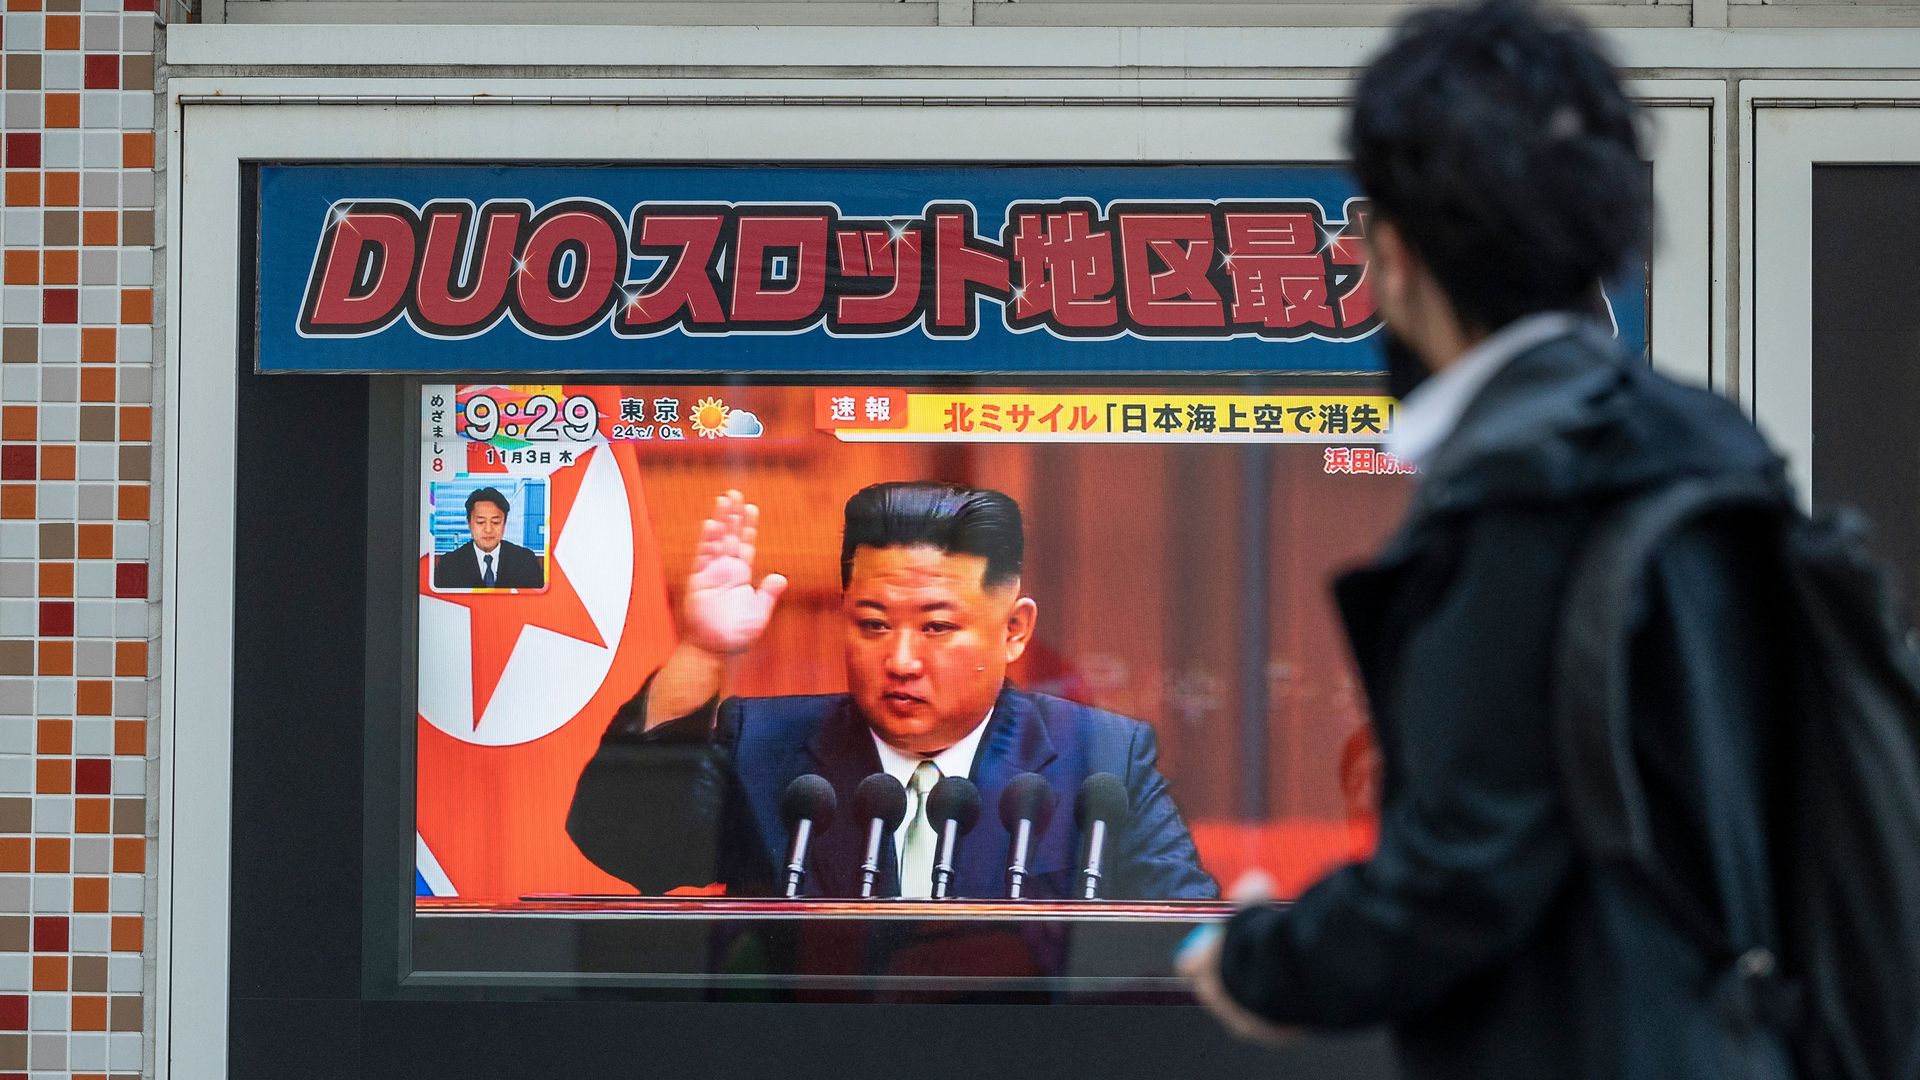 An image of the North's leader, Kim Jong-un on a TV in Tokyo on November 3.